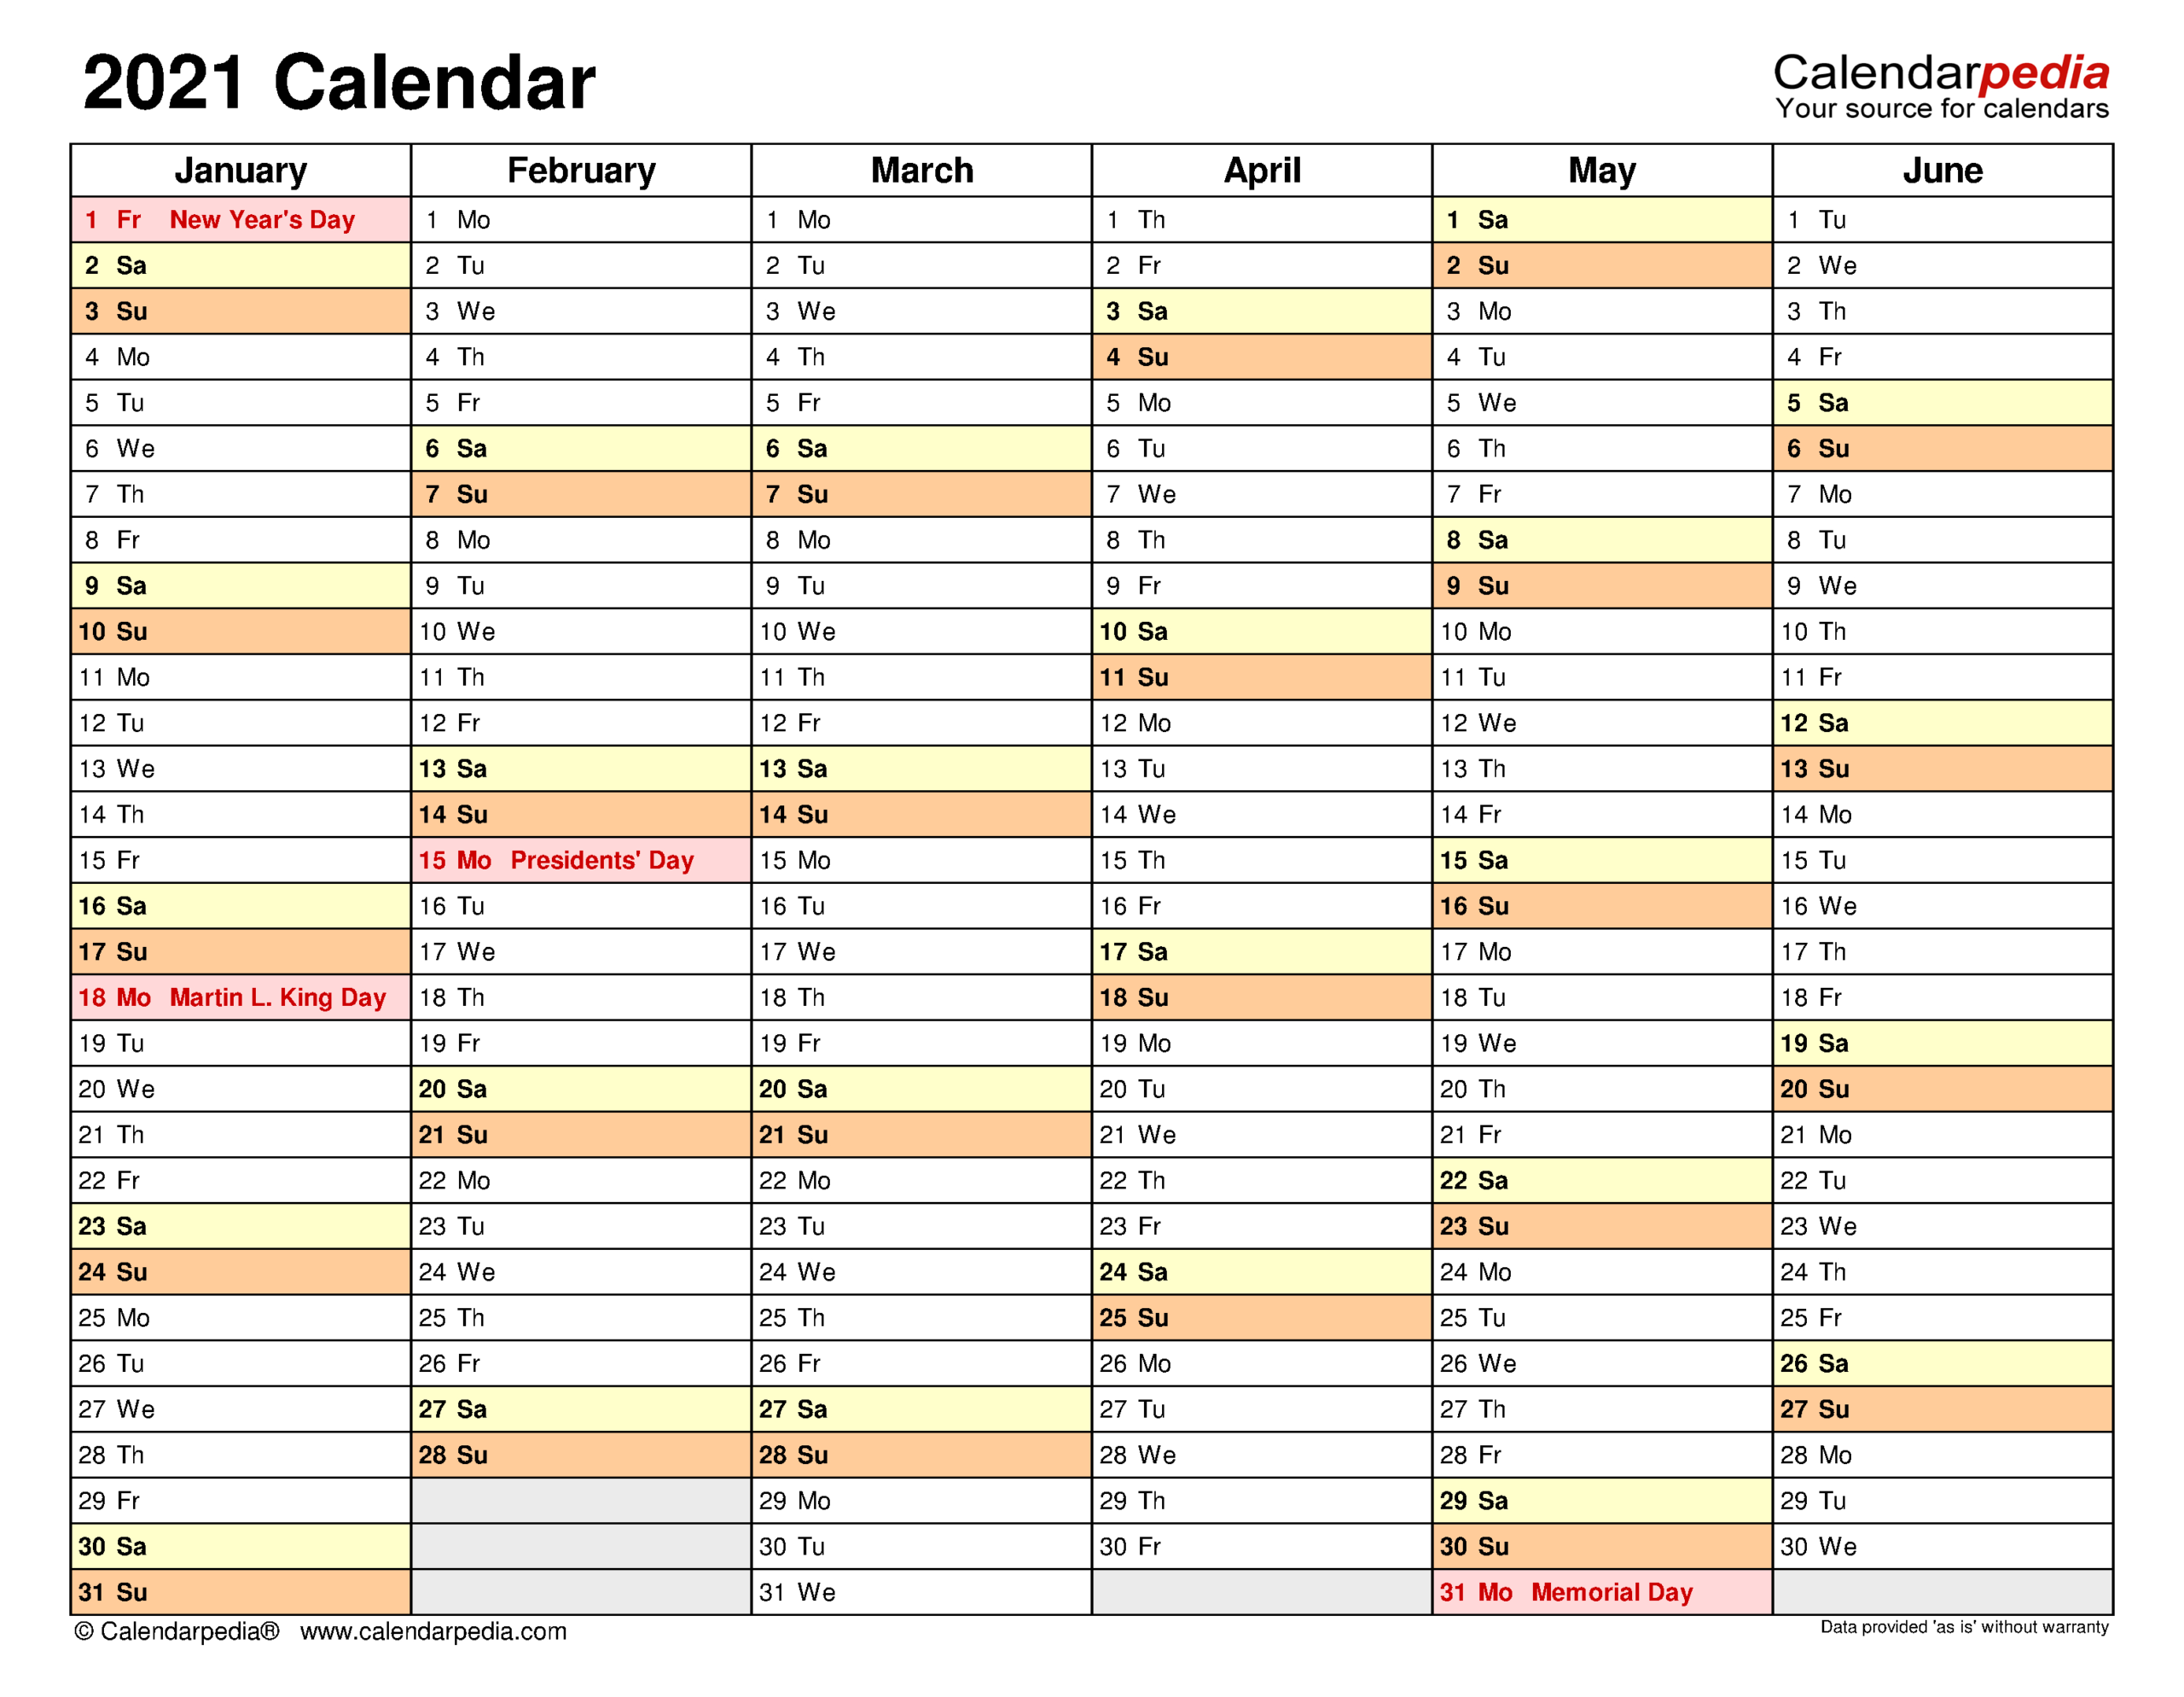 2021 Yearly Calendar Template Excel | Printable Calendars 2021